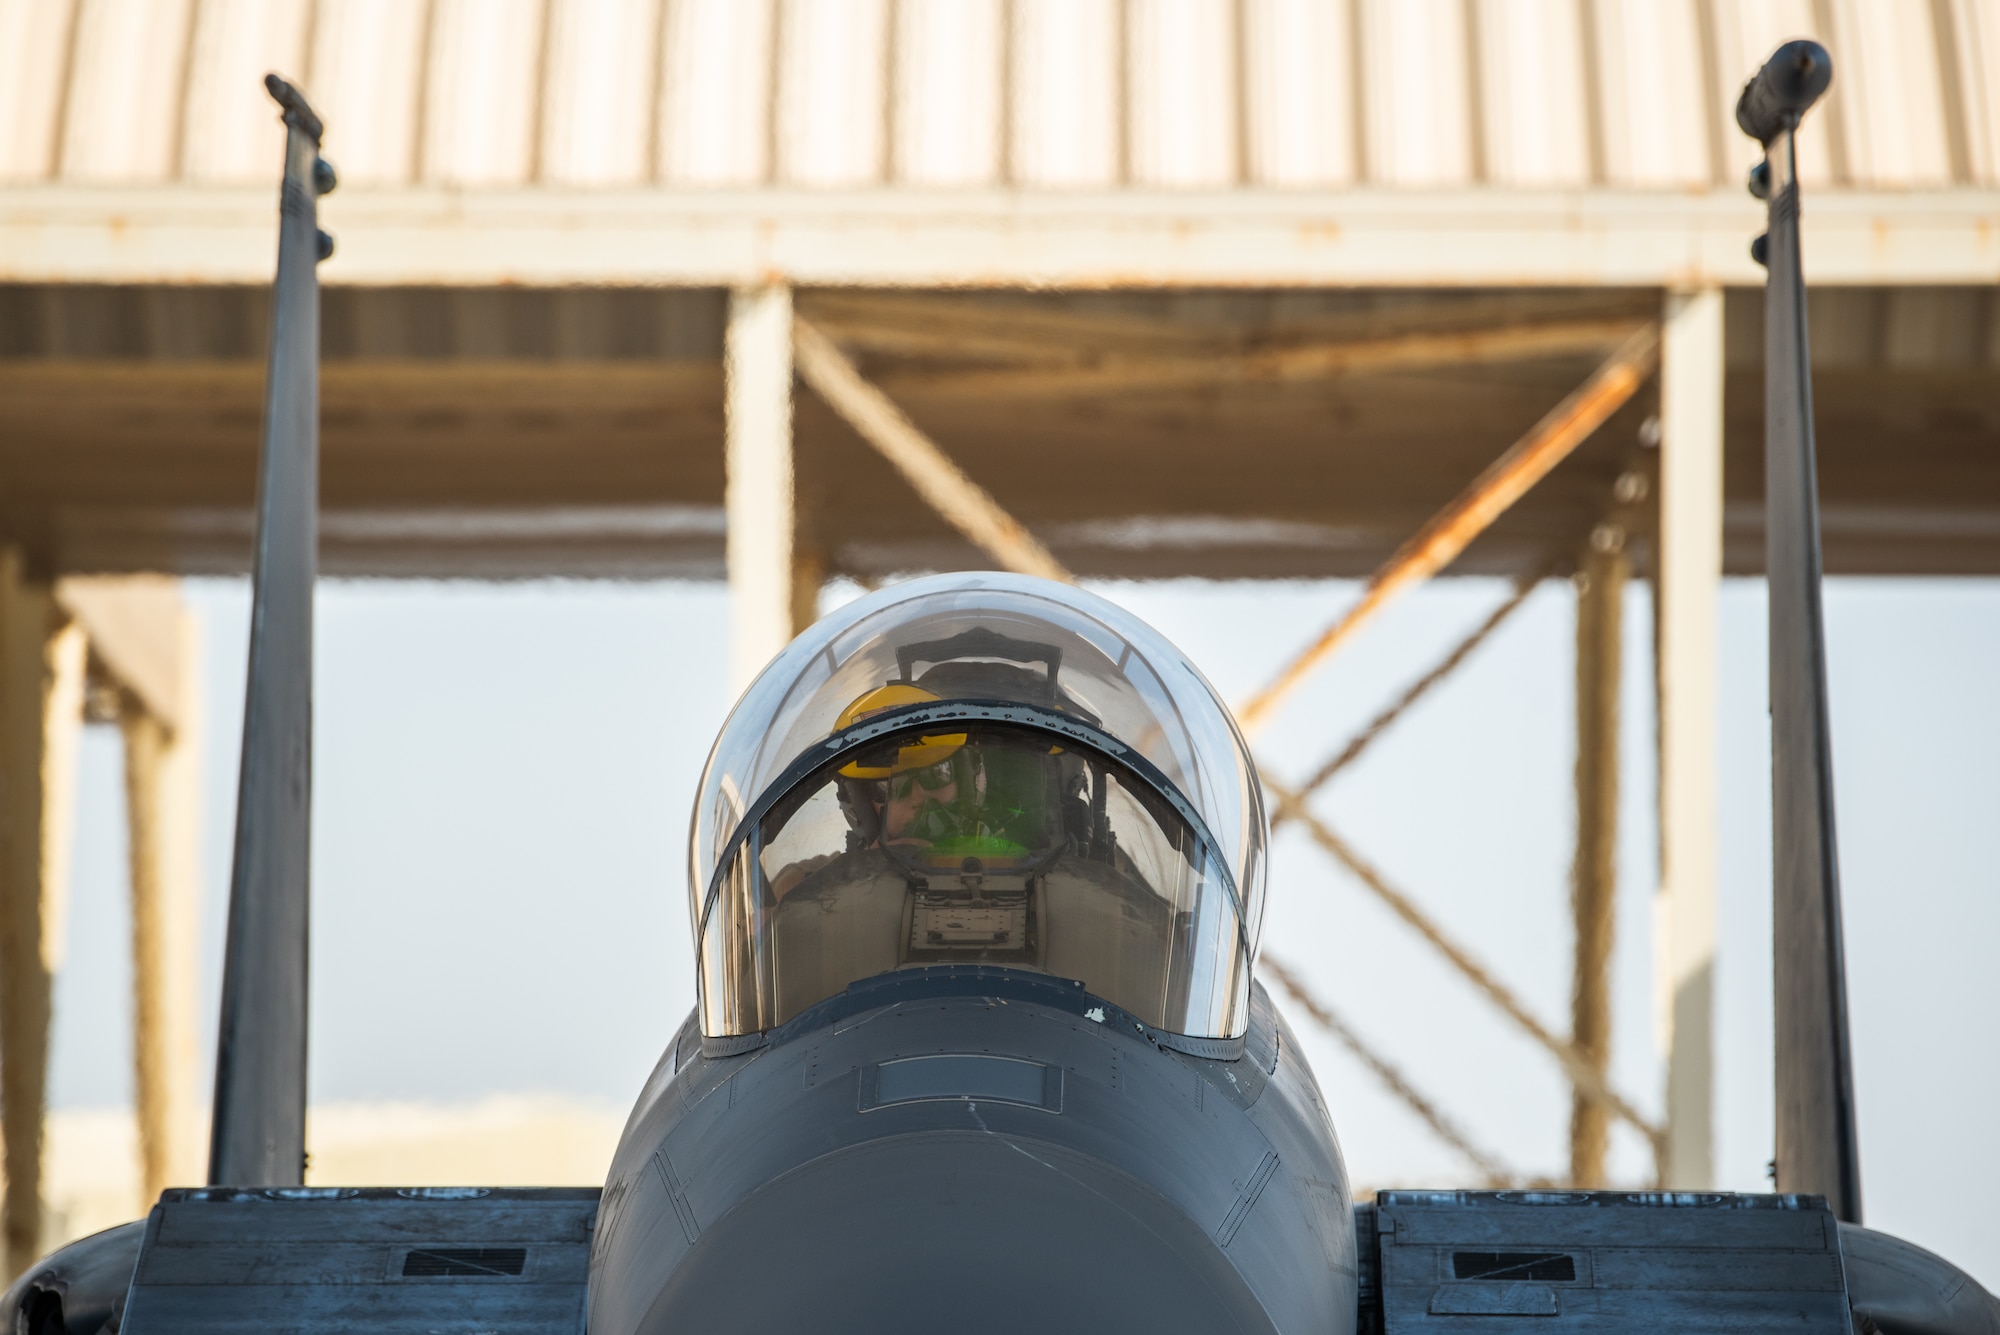 A 336th Expeditionary Fighter Squadron aircrew prepares for flight for Agile Strike Sept. 18, 2019, at Al Dhafra Air Base, United Arab Emirates. The 336th EFS sent two aircraft and personnel to operate missions out of Prince Sultan Air Base, Saudi Arabia to challenge their flexibility at expanding tactical and strategic reach while strengthening coalition and regional partnerships in the Air Forces Central Command area of responsibility through adaptive basing. (U.S. Air Force photo by Staff Sgt. Chris Thornbury)